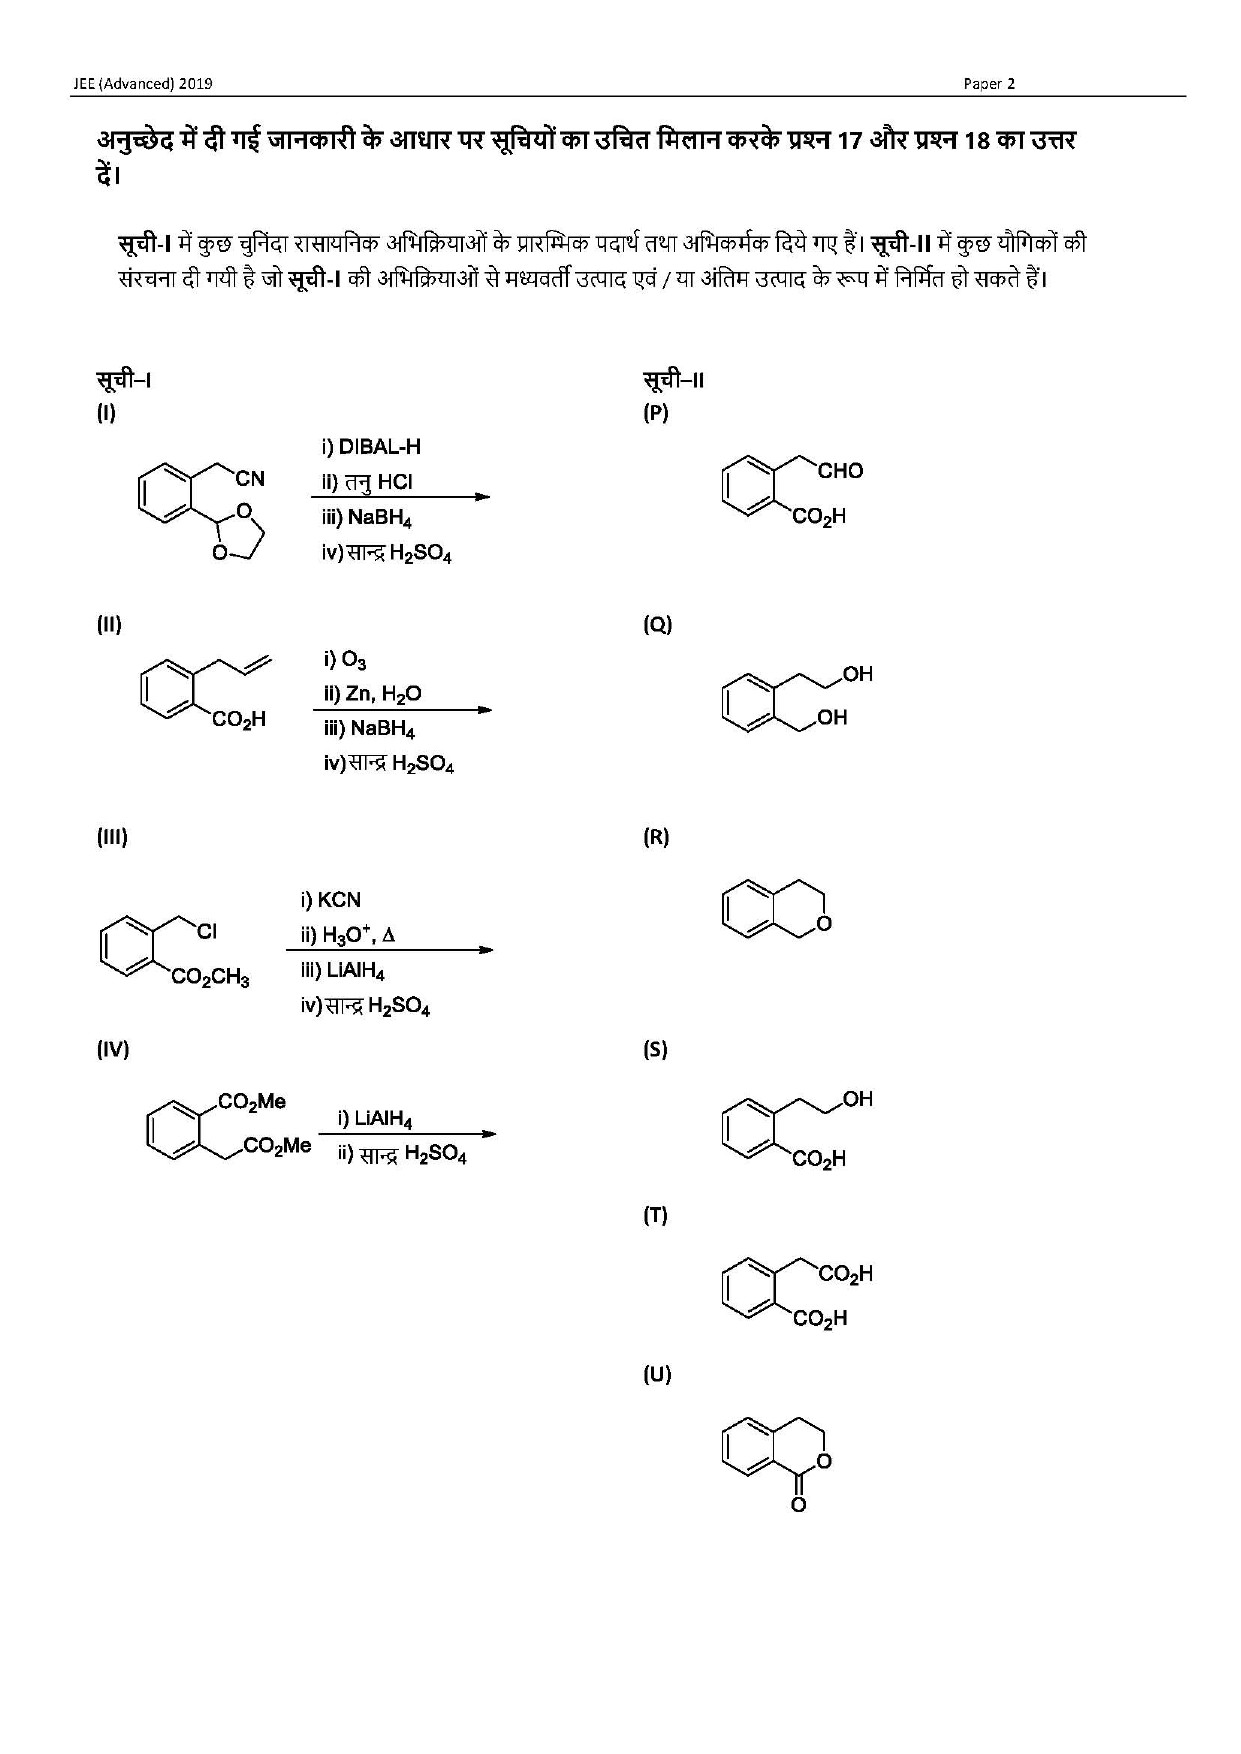 JEE Advanced Hindi Question Paper 2019 Paper 2 Chemistry 8